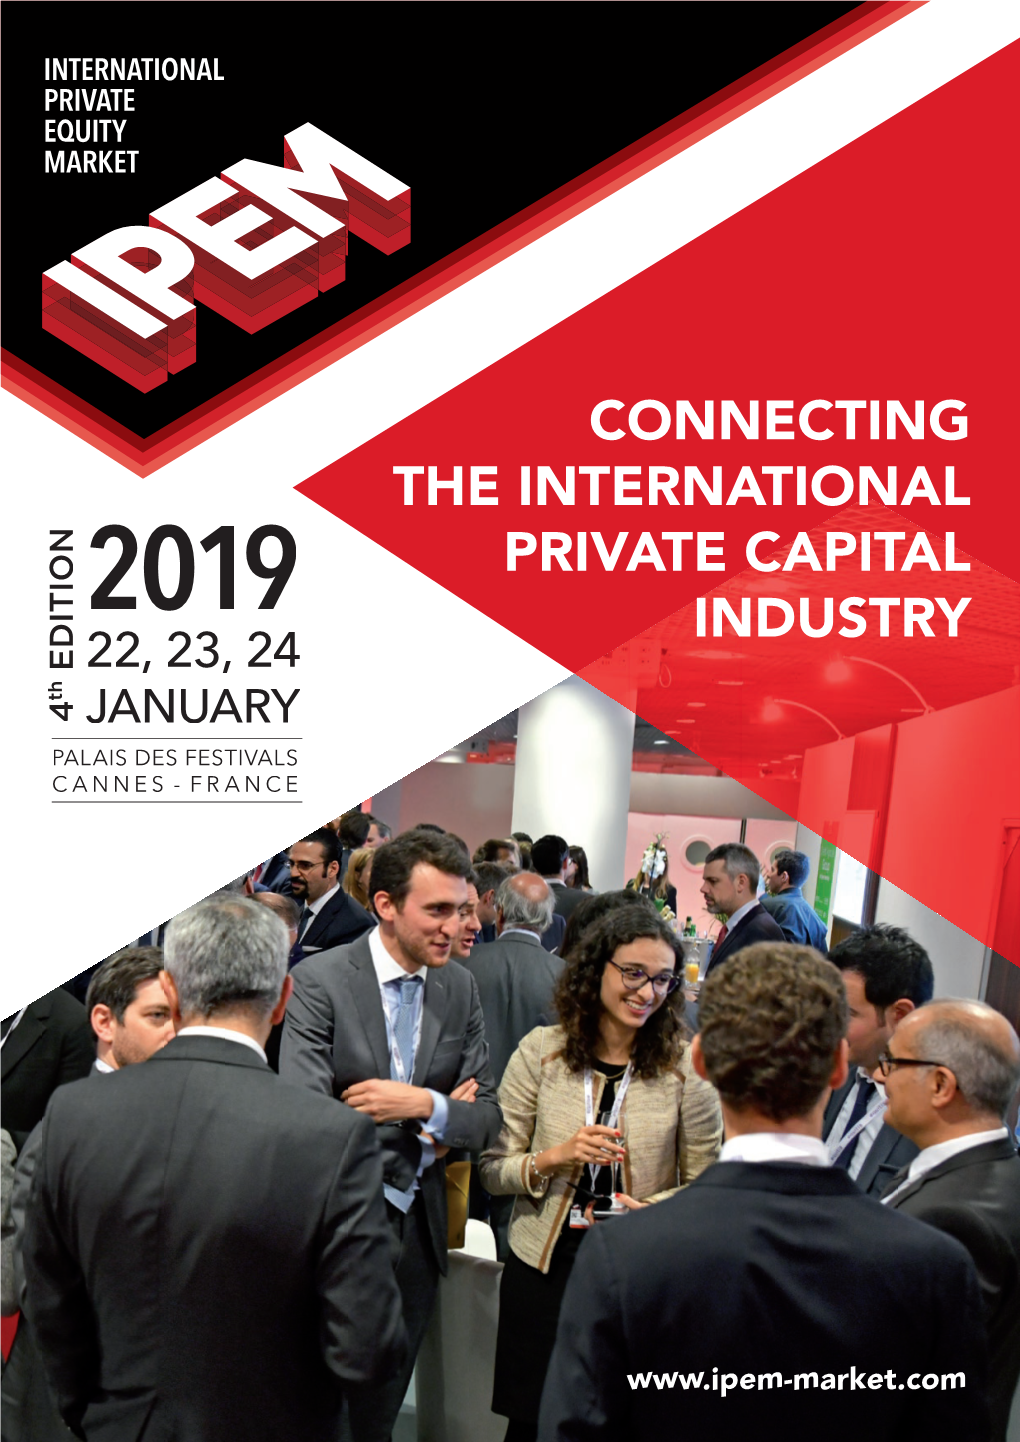 Connecting the International Private Capital Industry